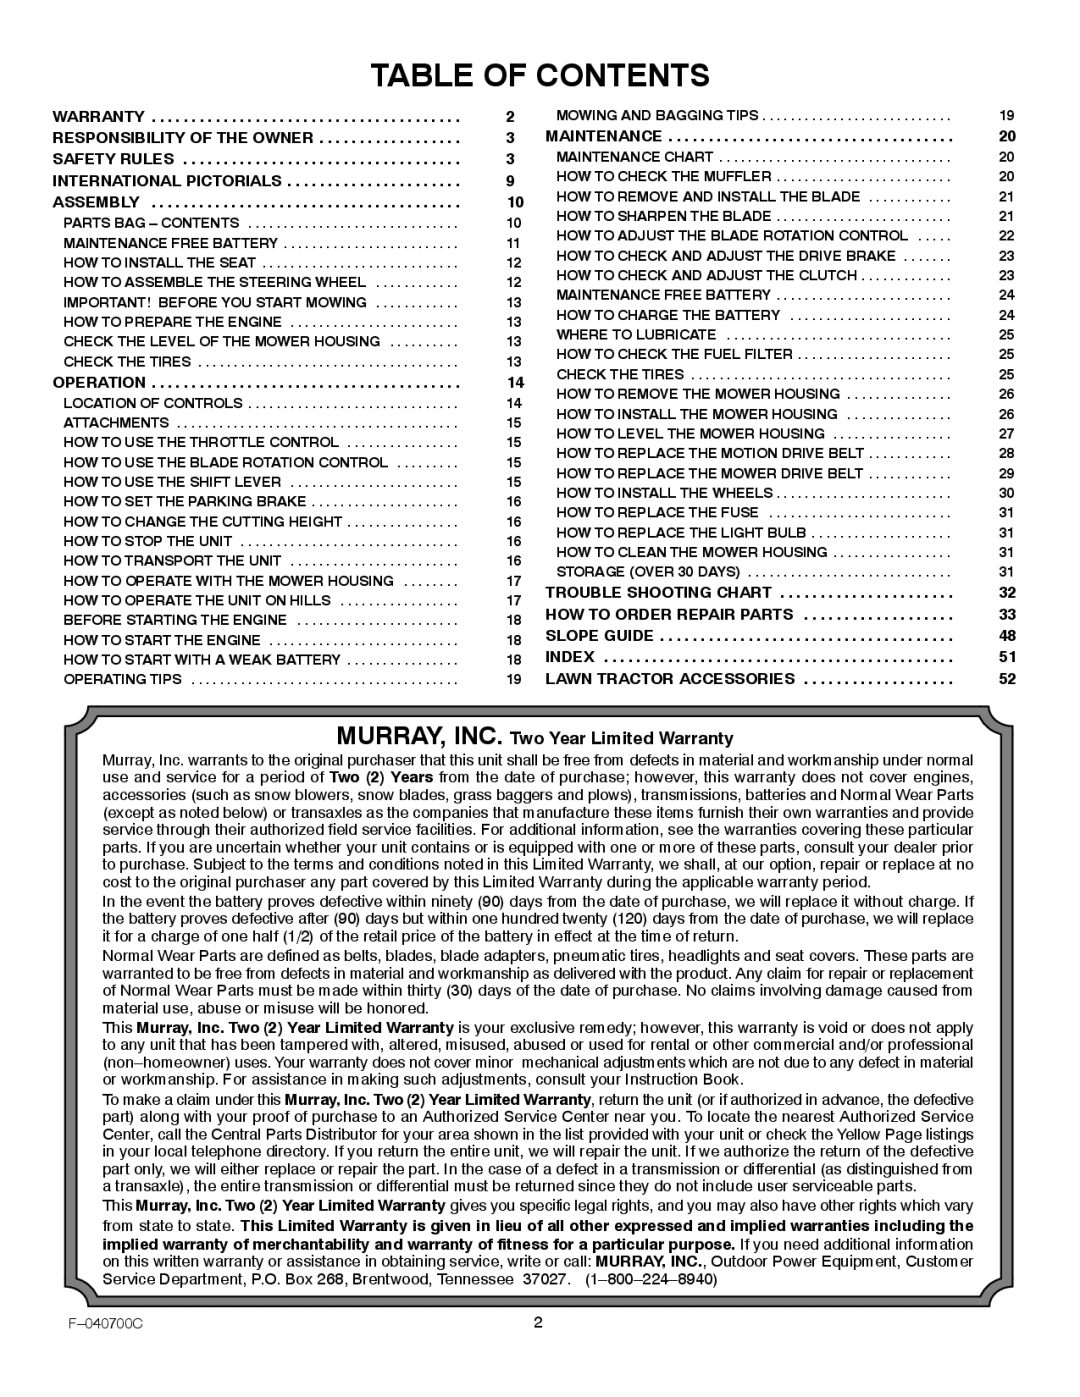 Stanley Black & Decker 387002x92NA manual Table of Contents 